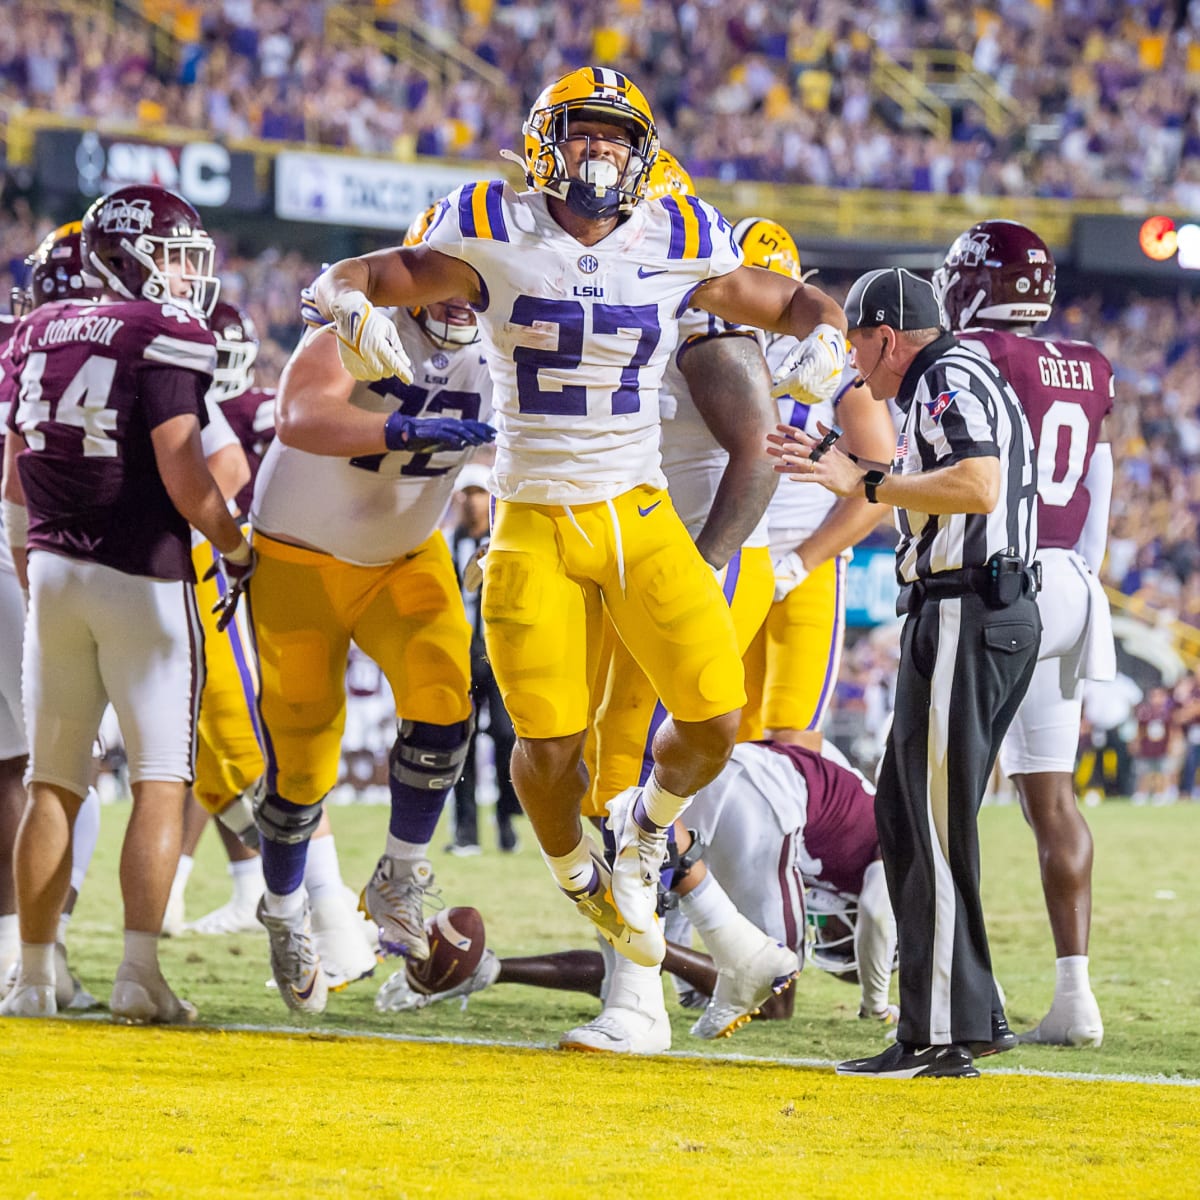 'Williams is without a doubt the emotional heartbeat of Brian Kelly's 2024 LSU Tigers: The 6th year senior running back....captain & starter for the last 2 seasons....the final remaining 2019 Tiger on roster.....a meat and potatoes rusher who steadfastly climbed from walk-on to